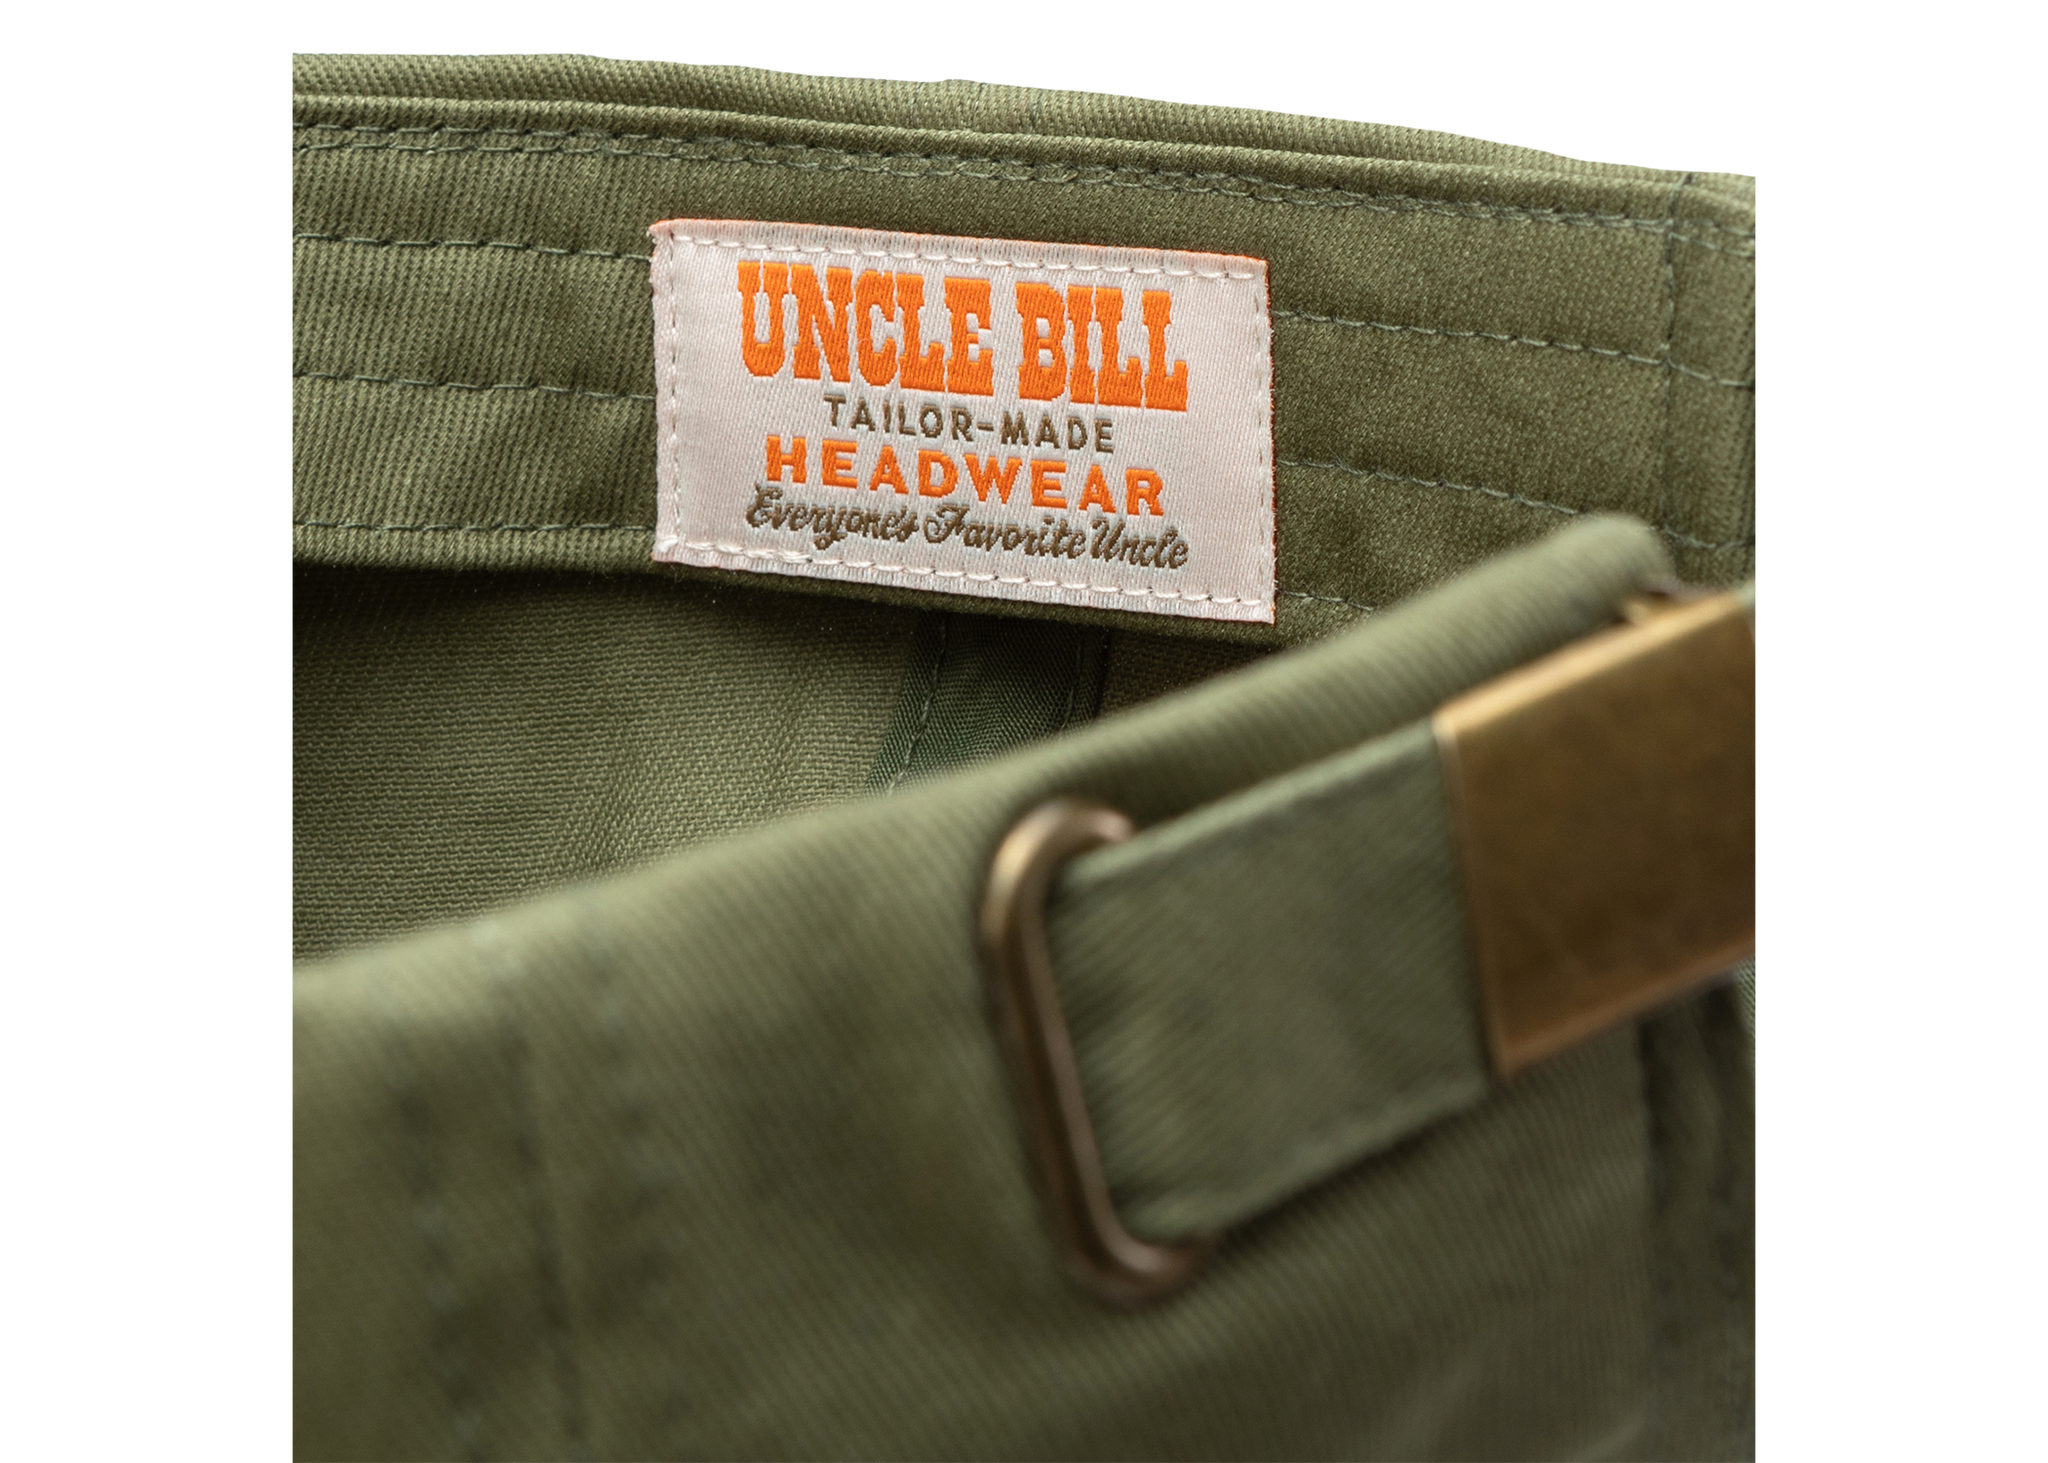 Inside close up view of sewn in tag that reads: "uncle bill tailor-made headwear everyone's favorite Uncle"